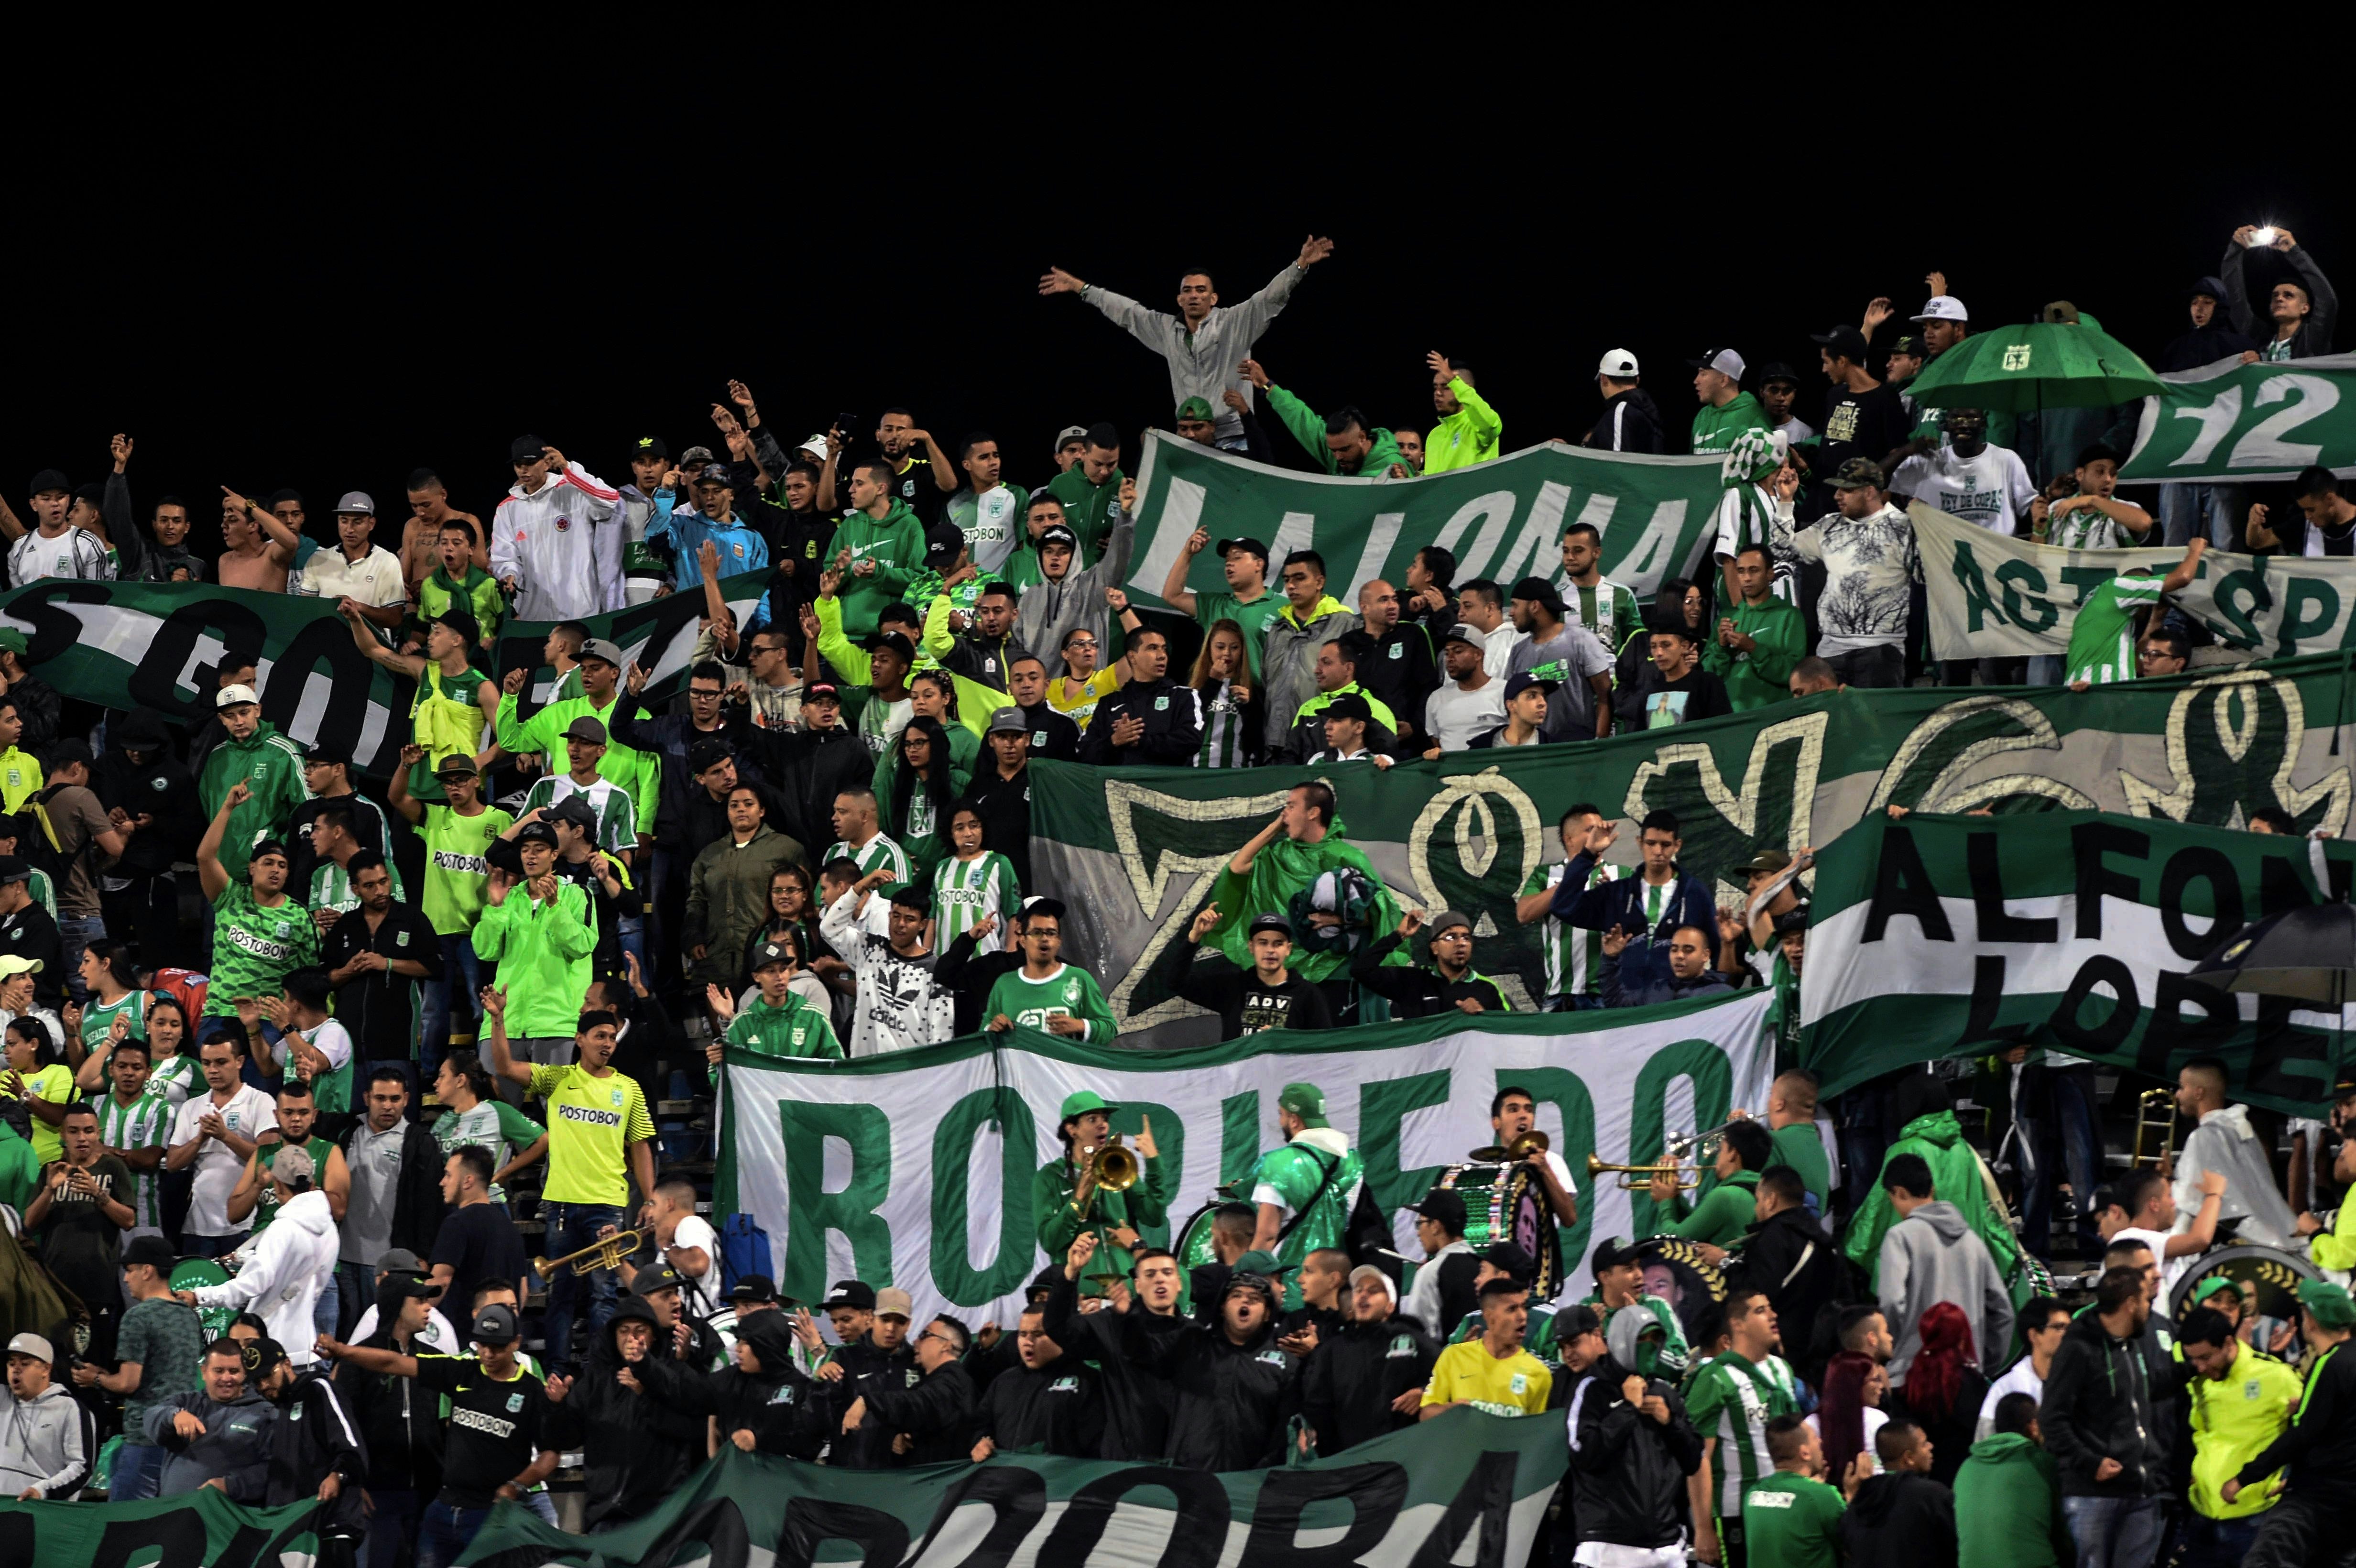 A large group of fans decked out in green and white wave flags and large banners in a stadium in Colombia.